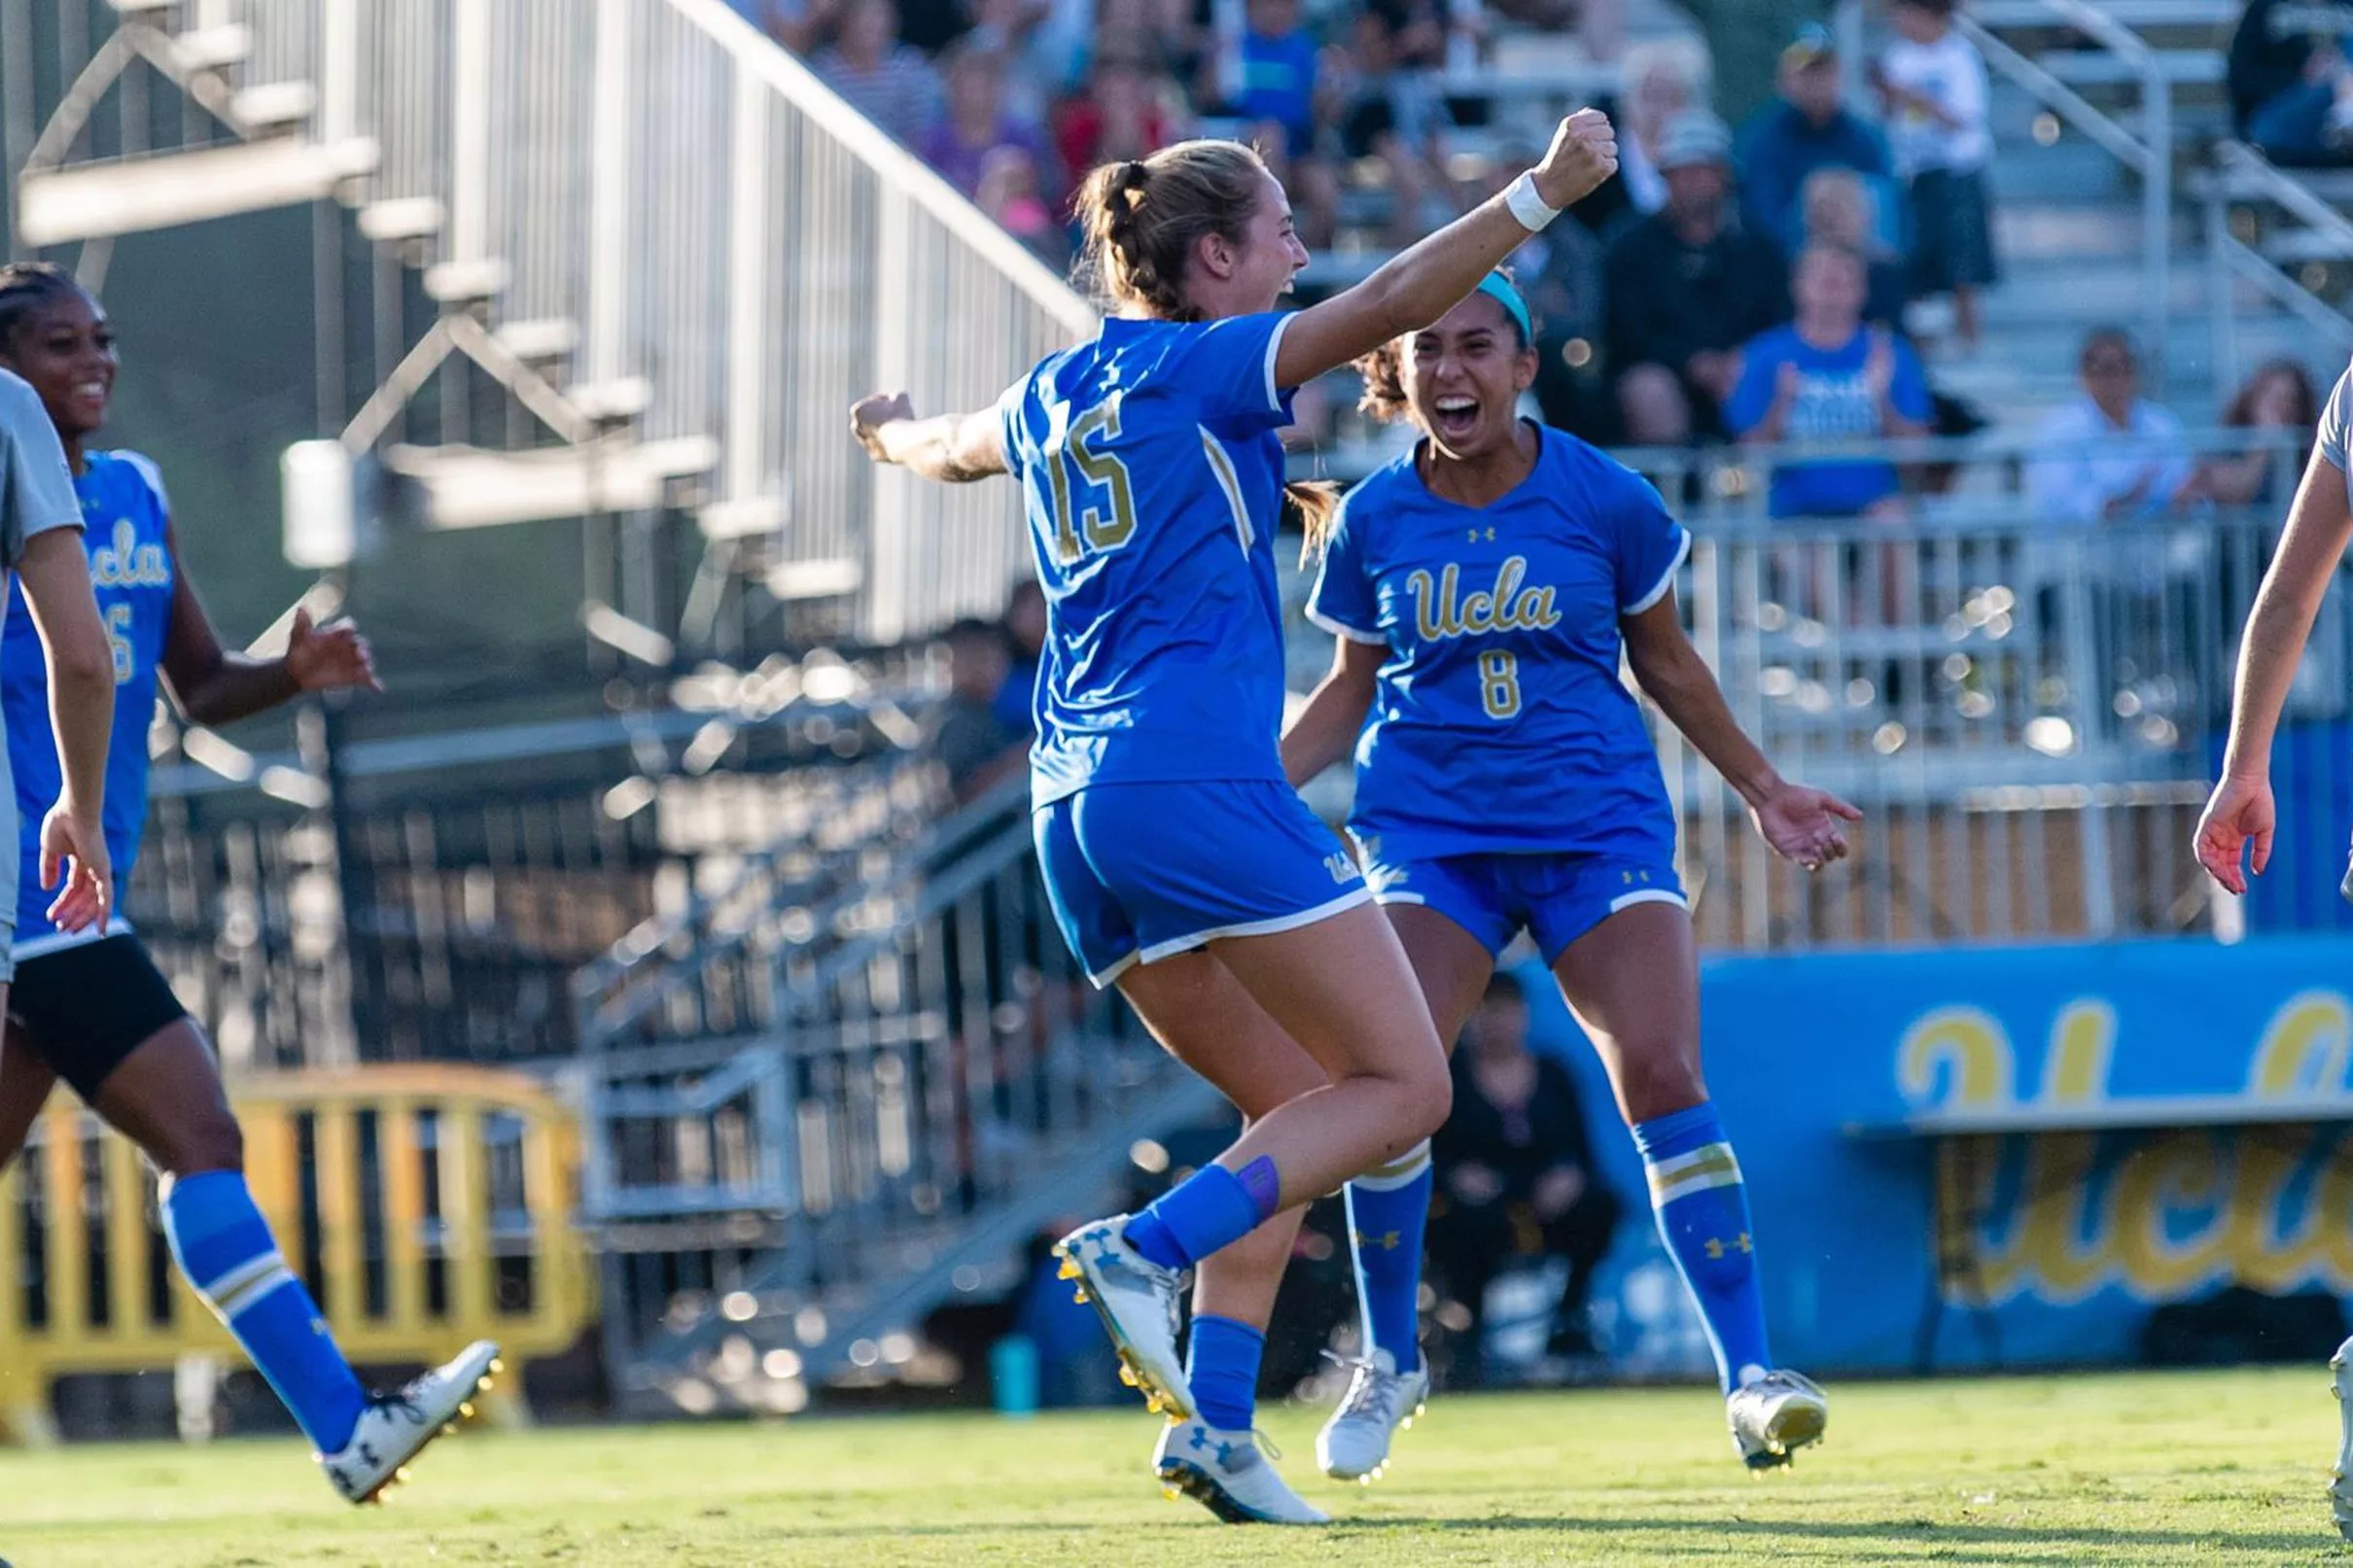 UCLA Women’s Soccer Hosts Utah After Shutting Out Colorado, 3-0